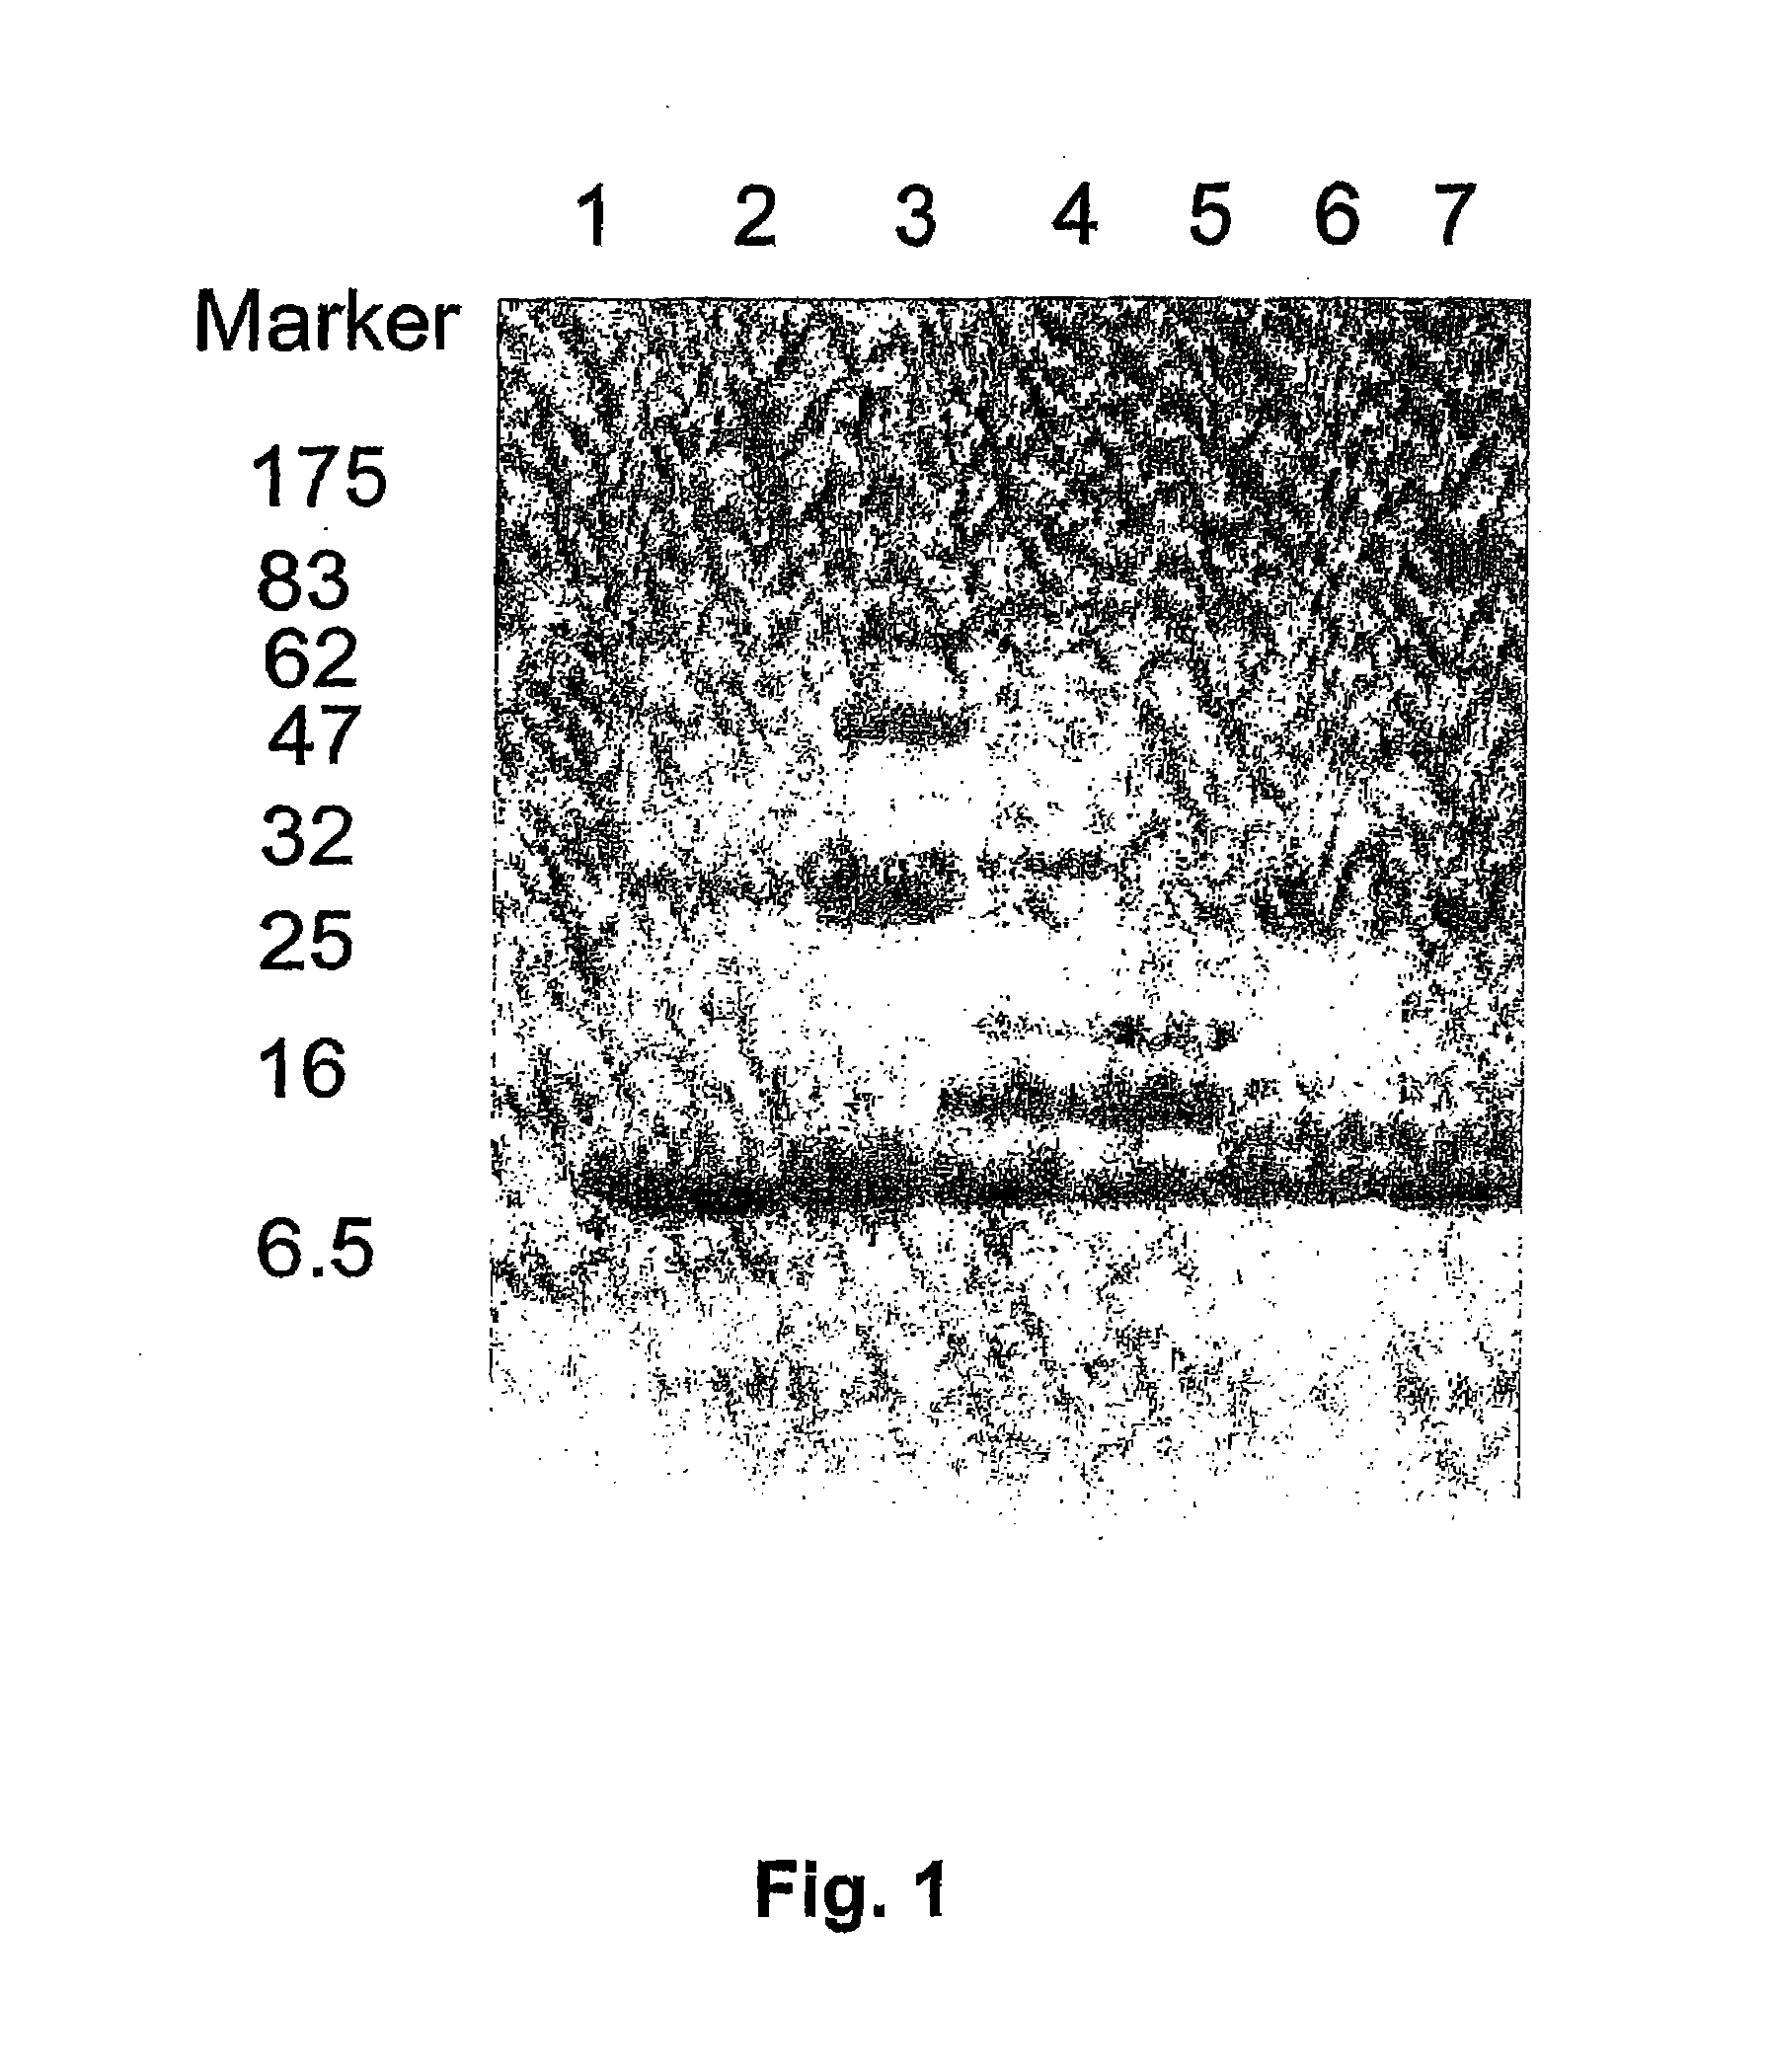 Packaging of Immunostimulatory Substances Into Virus-Like Particles: Method of Preparation and Use